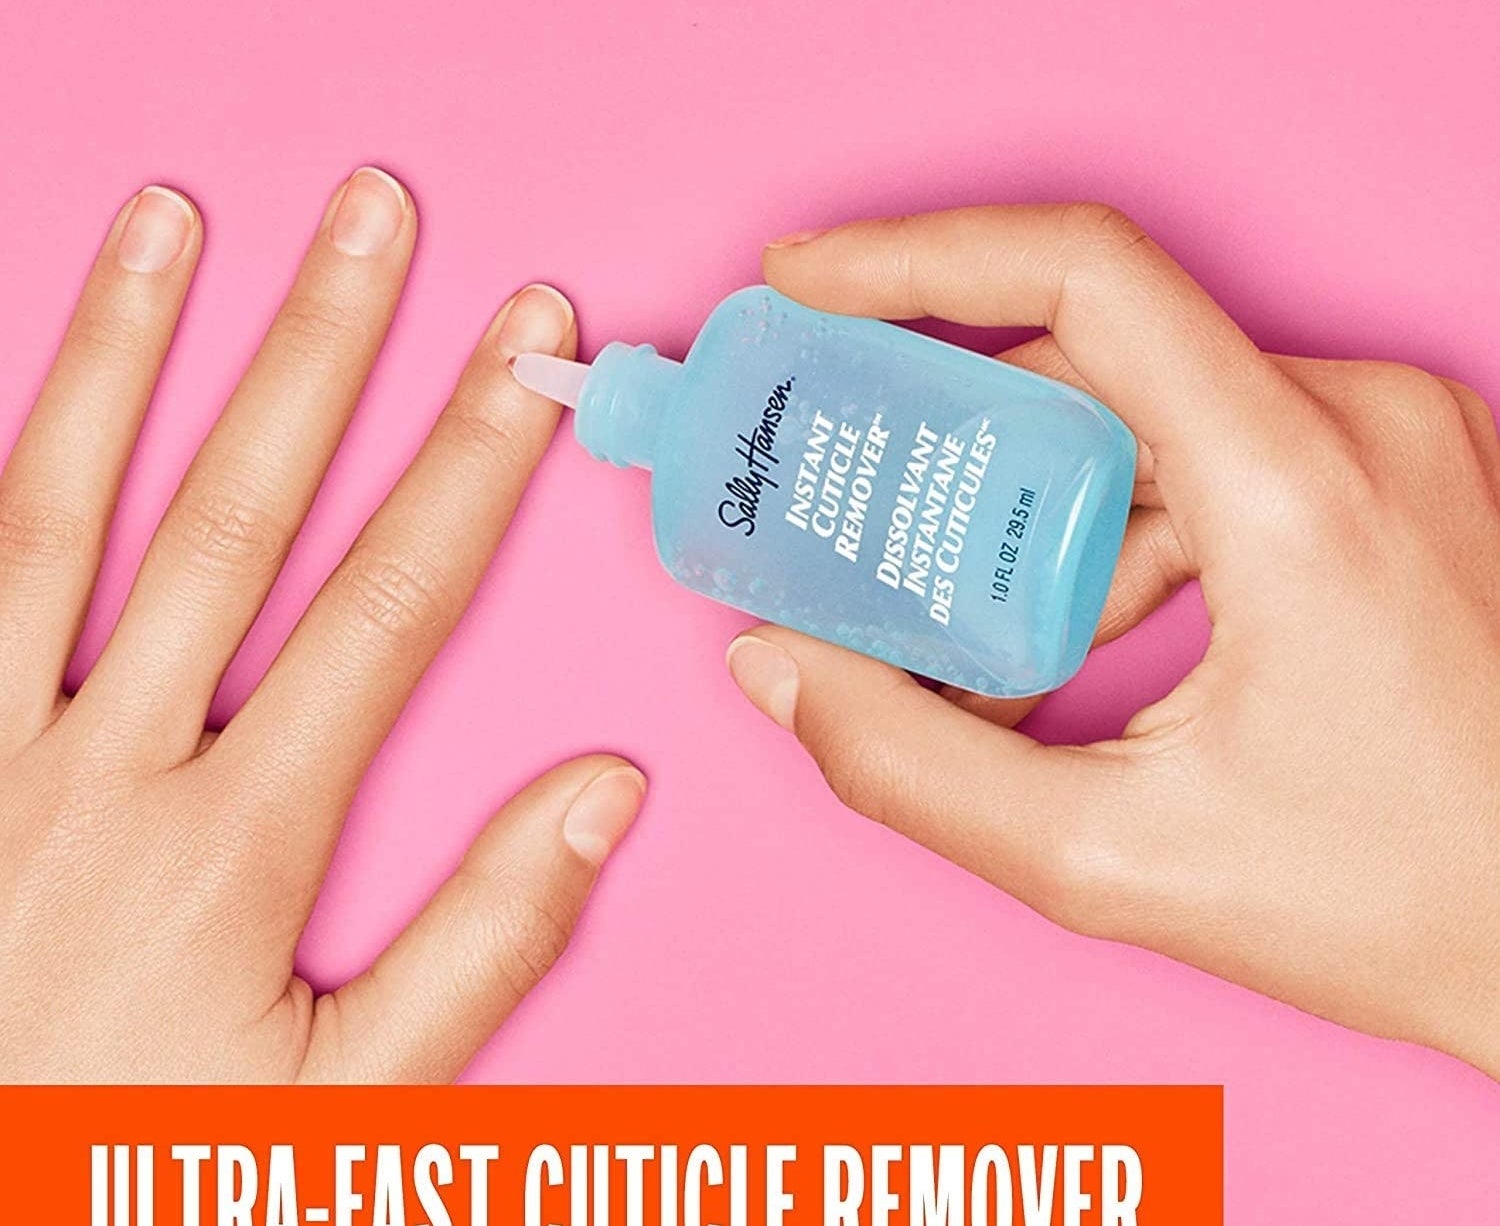 A person holding the cuticle removing solution to their cuticle